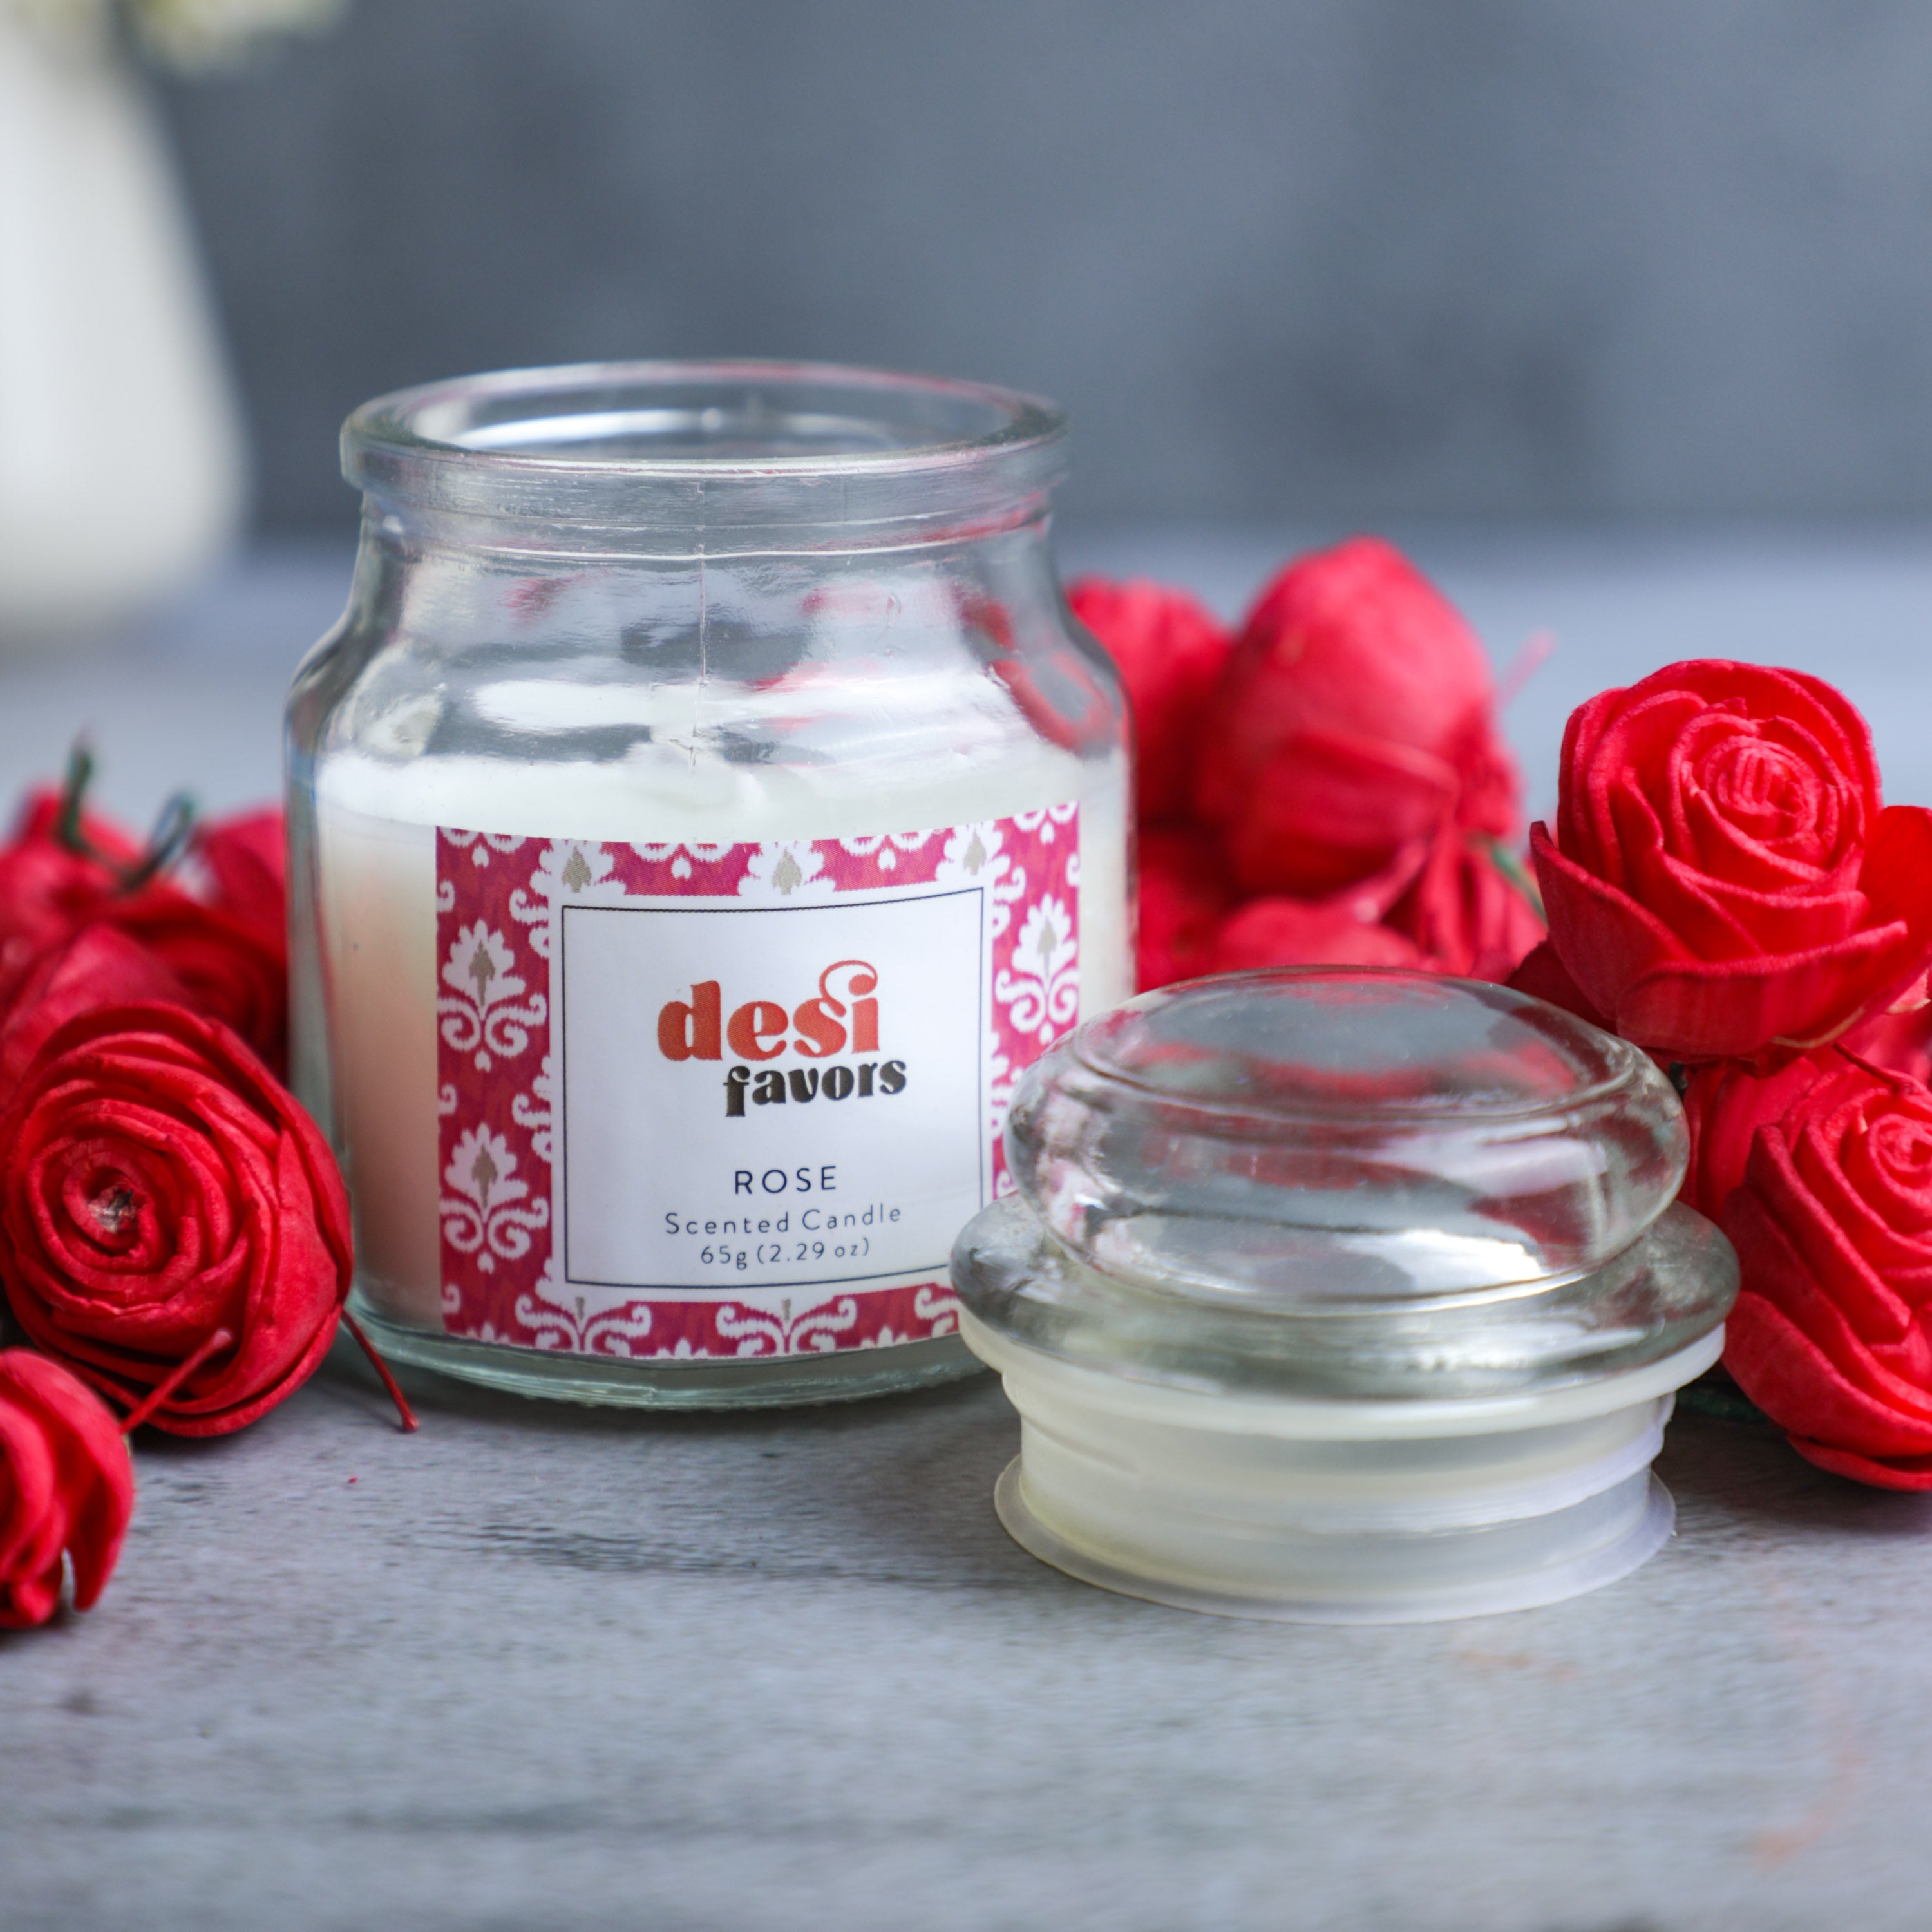 Scented Candle in glass jar with lid, is made with tender, velvety buds and perfectly mixed to a rosy hue.